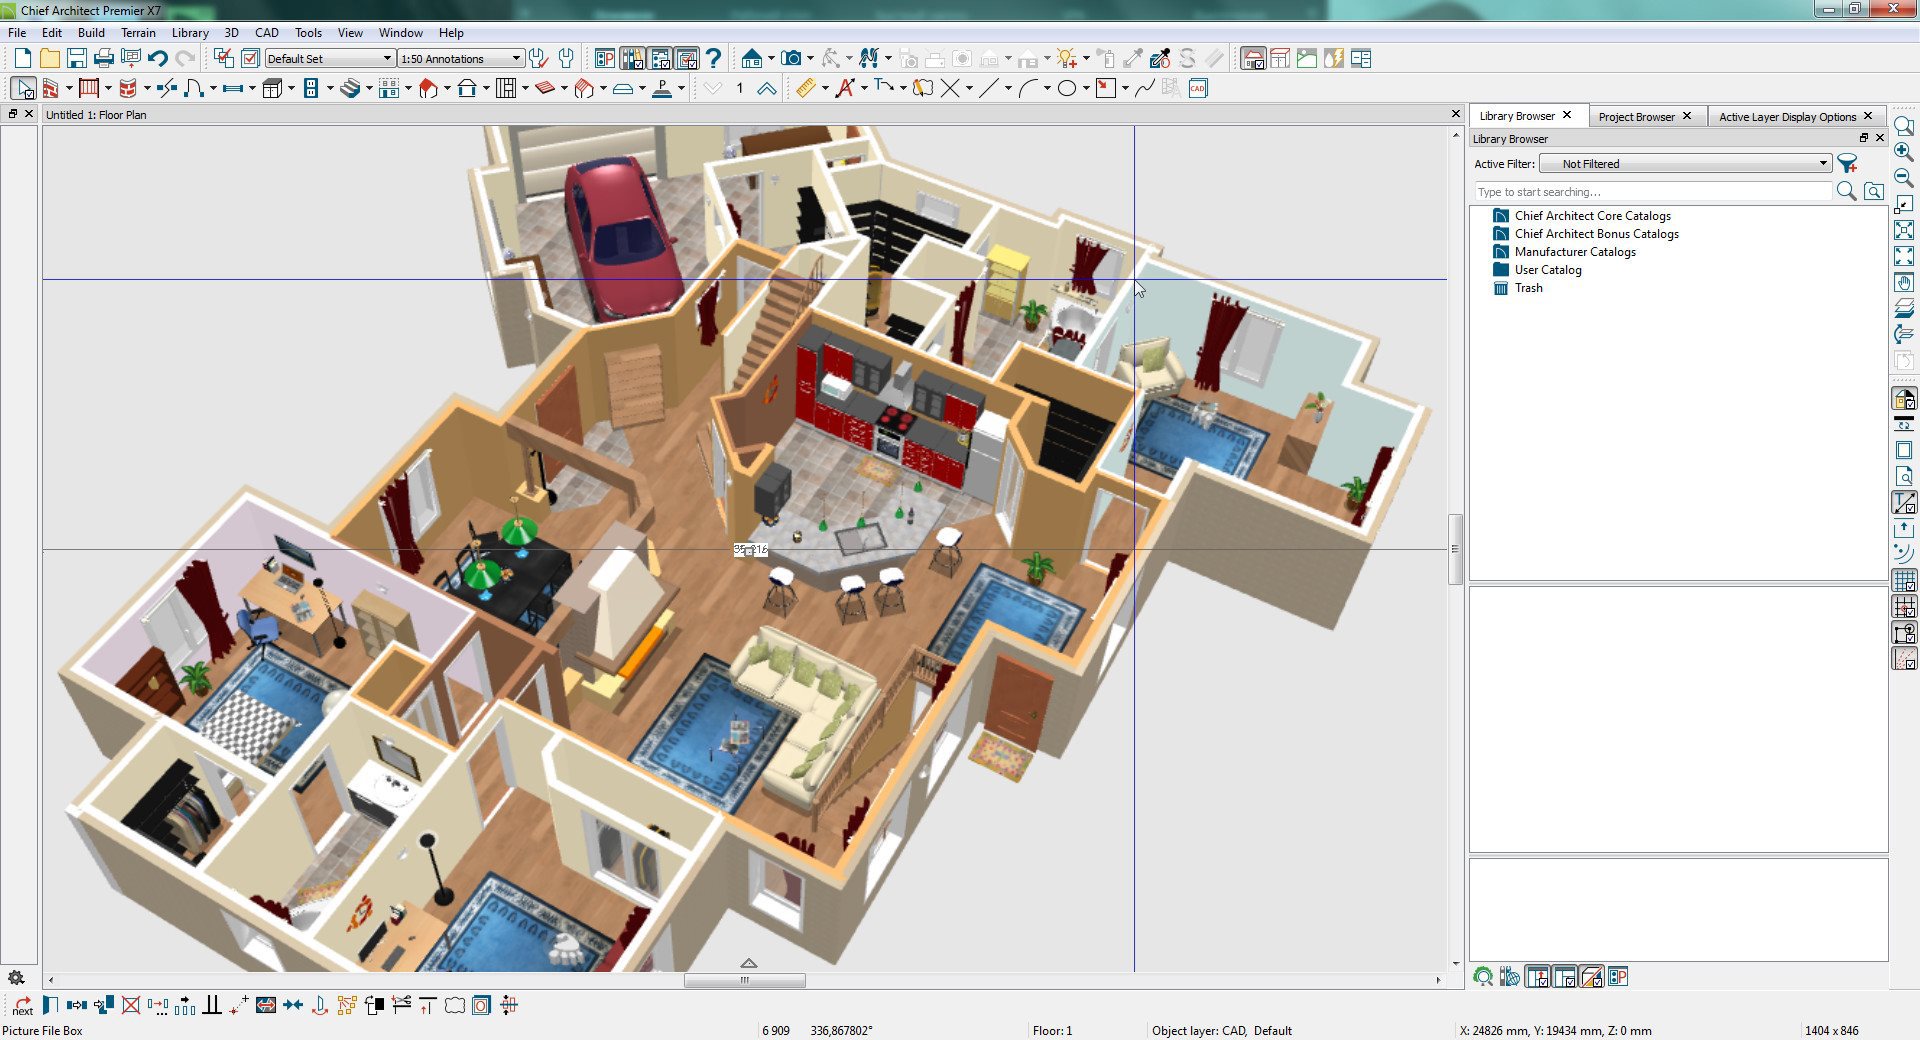 Chief Architect Premier X15 v25.3.0.77 + Interiors download the new for apple